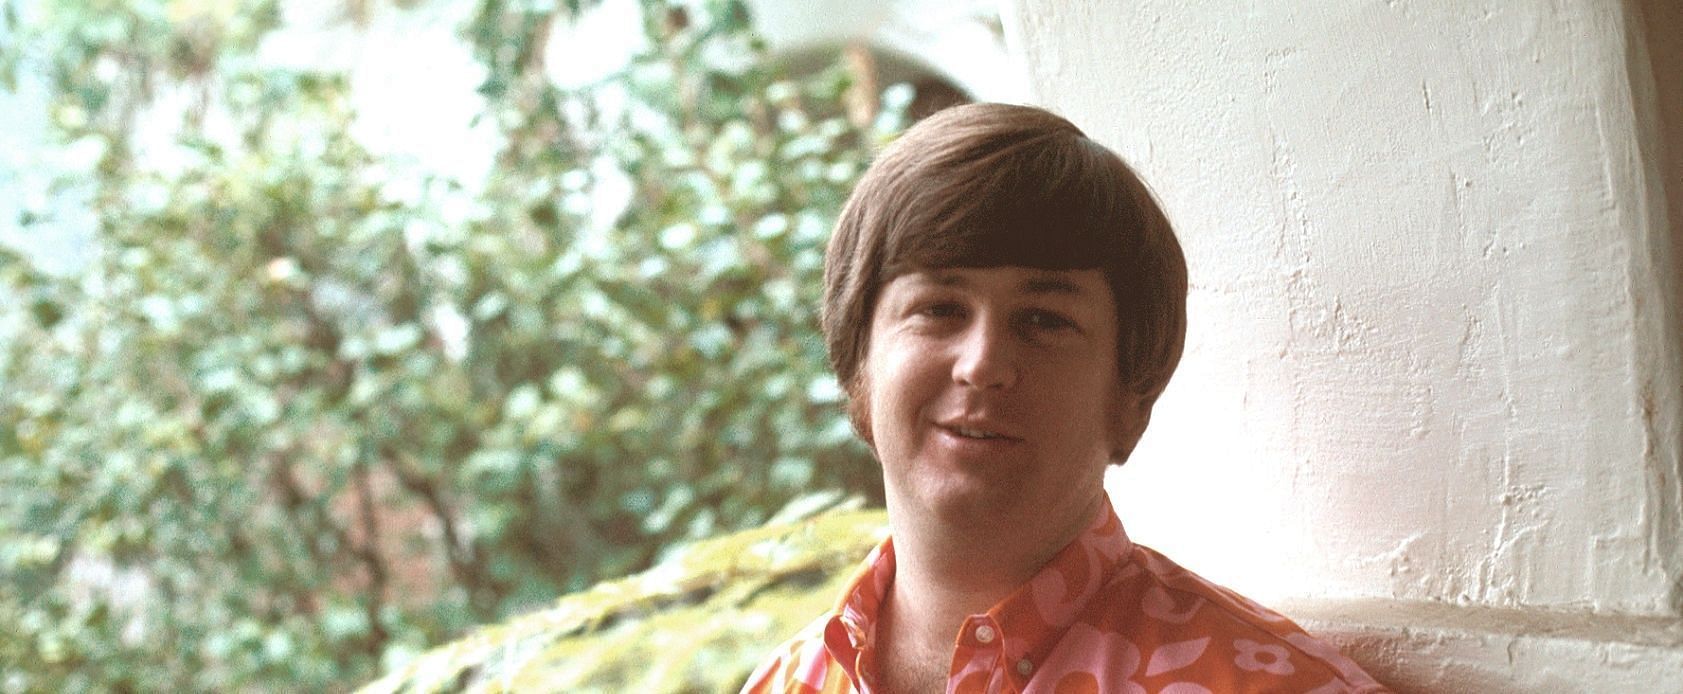 Brian Wilson has been suffering from schizoaffective disorder for more than four decades (Image via Michael Ochs/Getty Images)